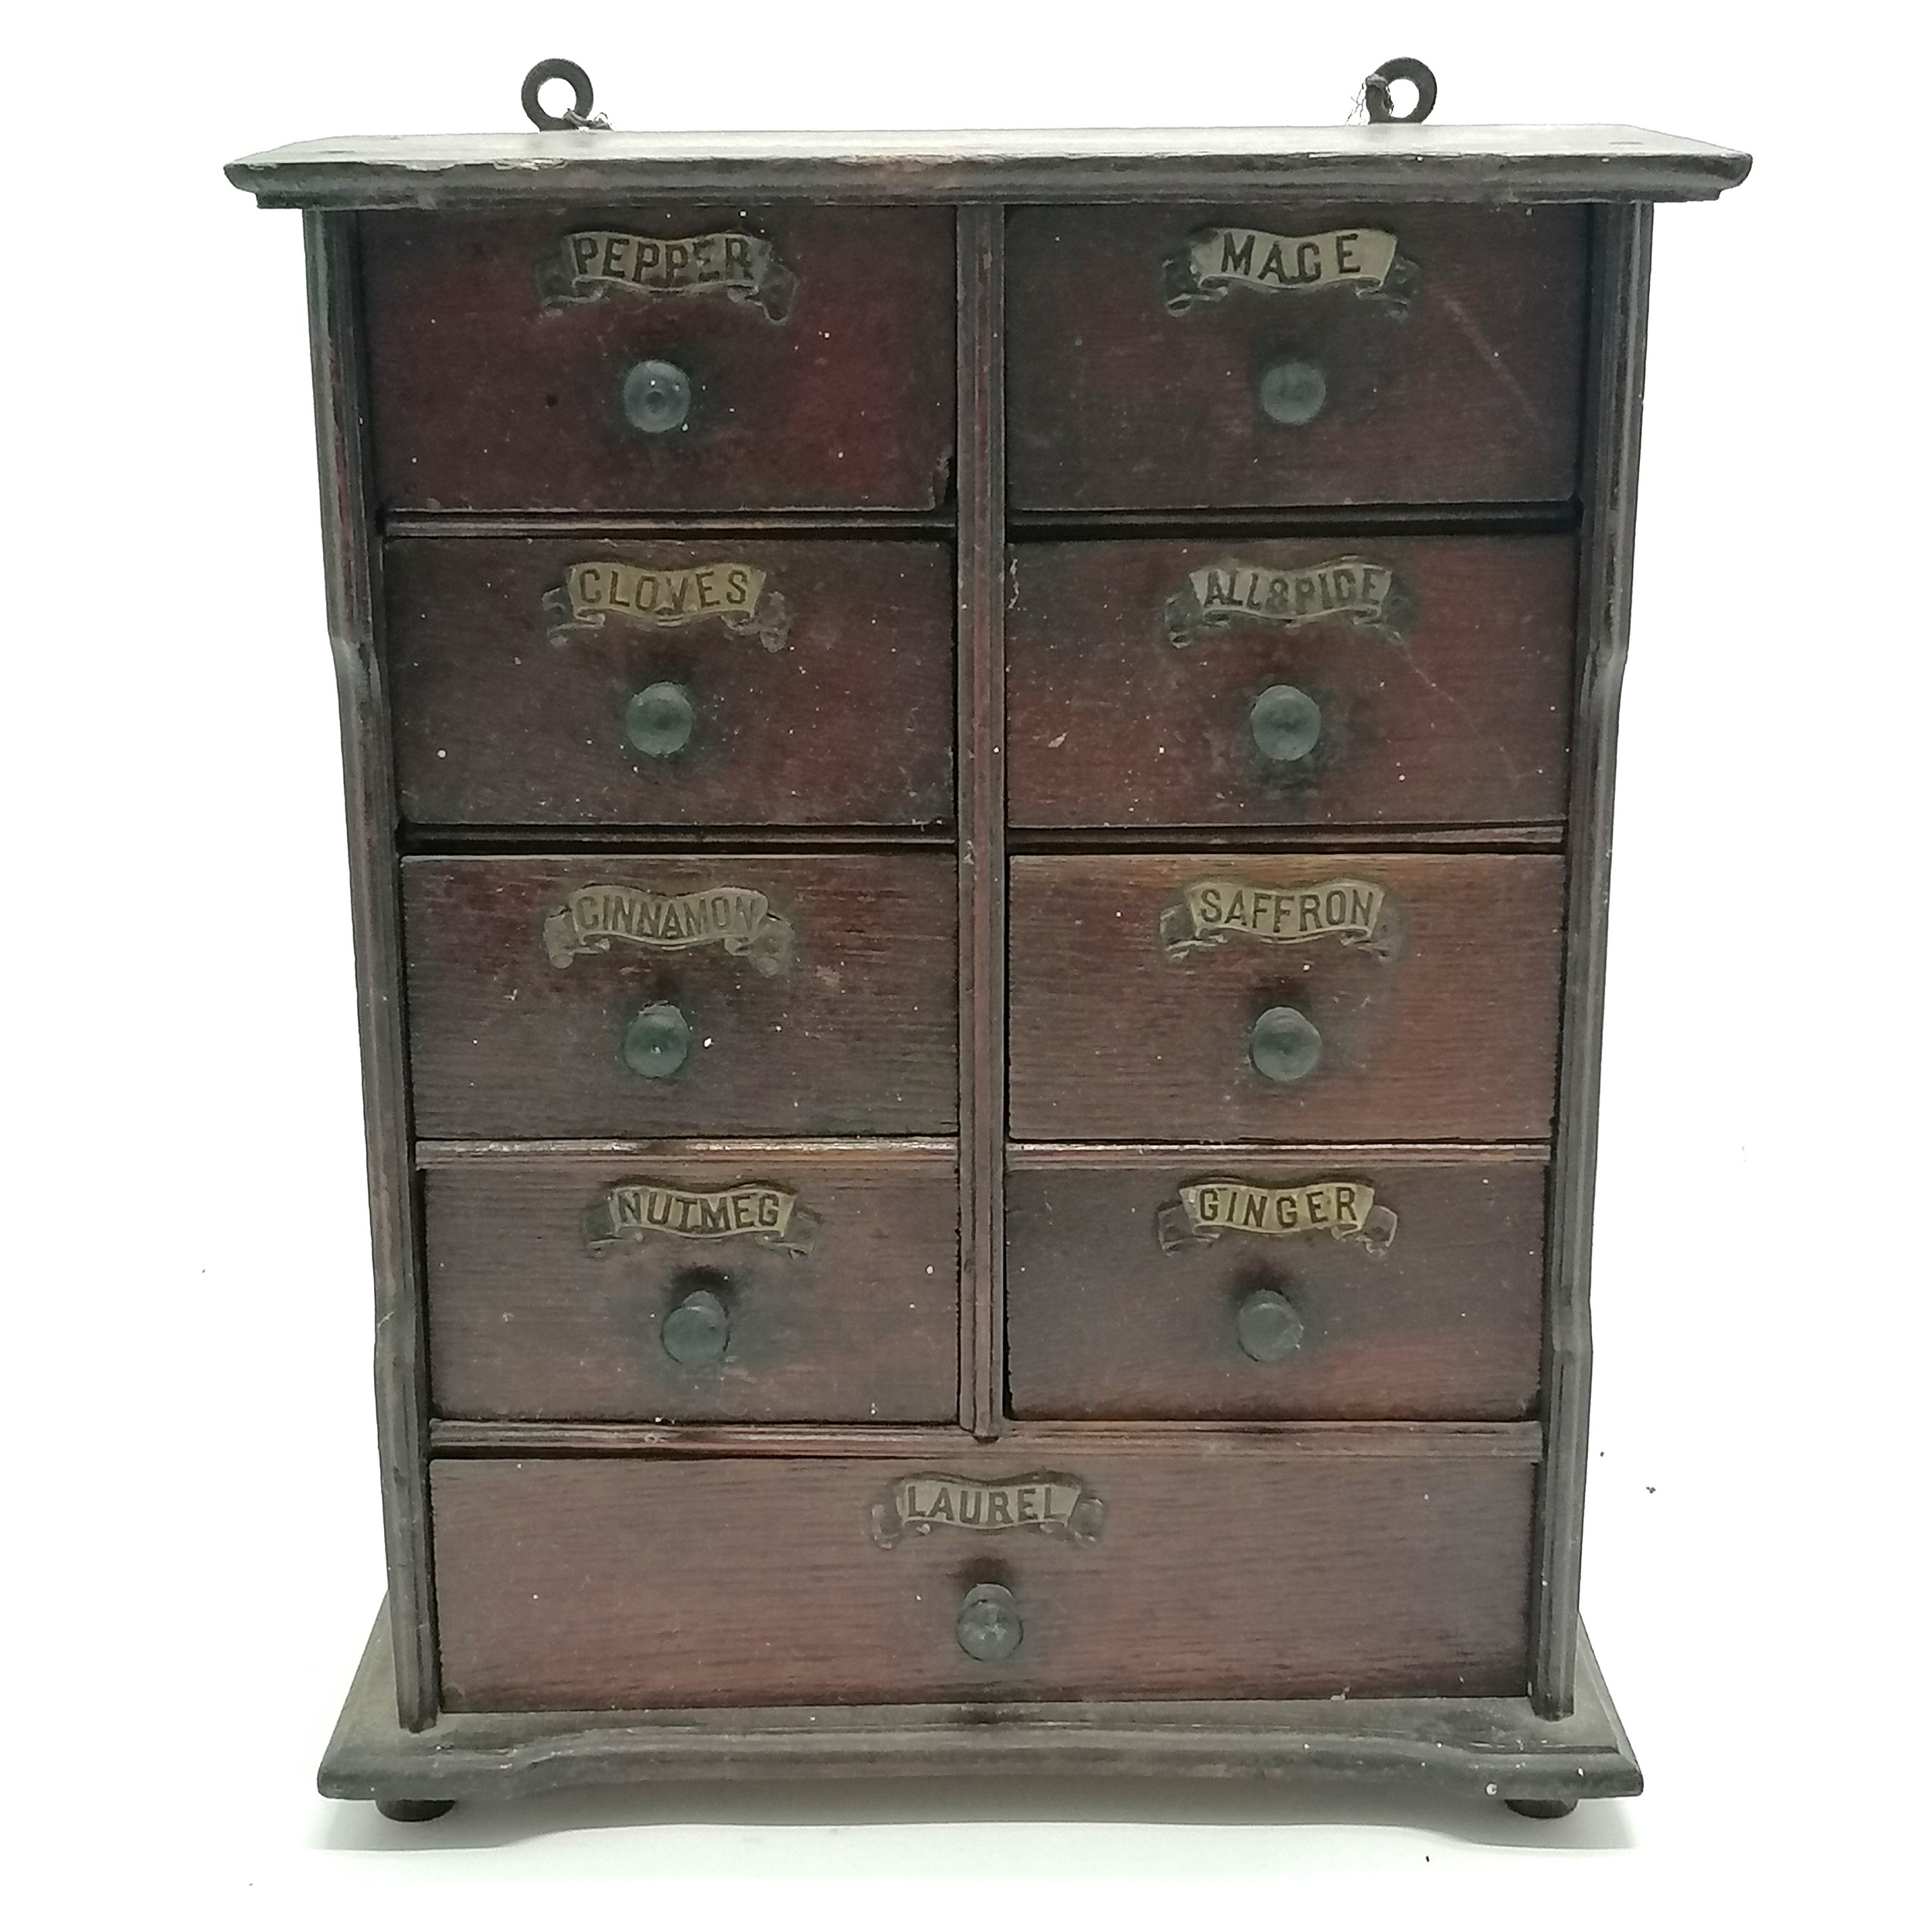 Antique wooden spice cabinet with 9 drawers & with original metal labels - 32cm high x 26cm wide x